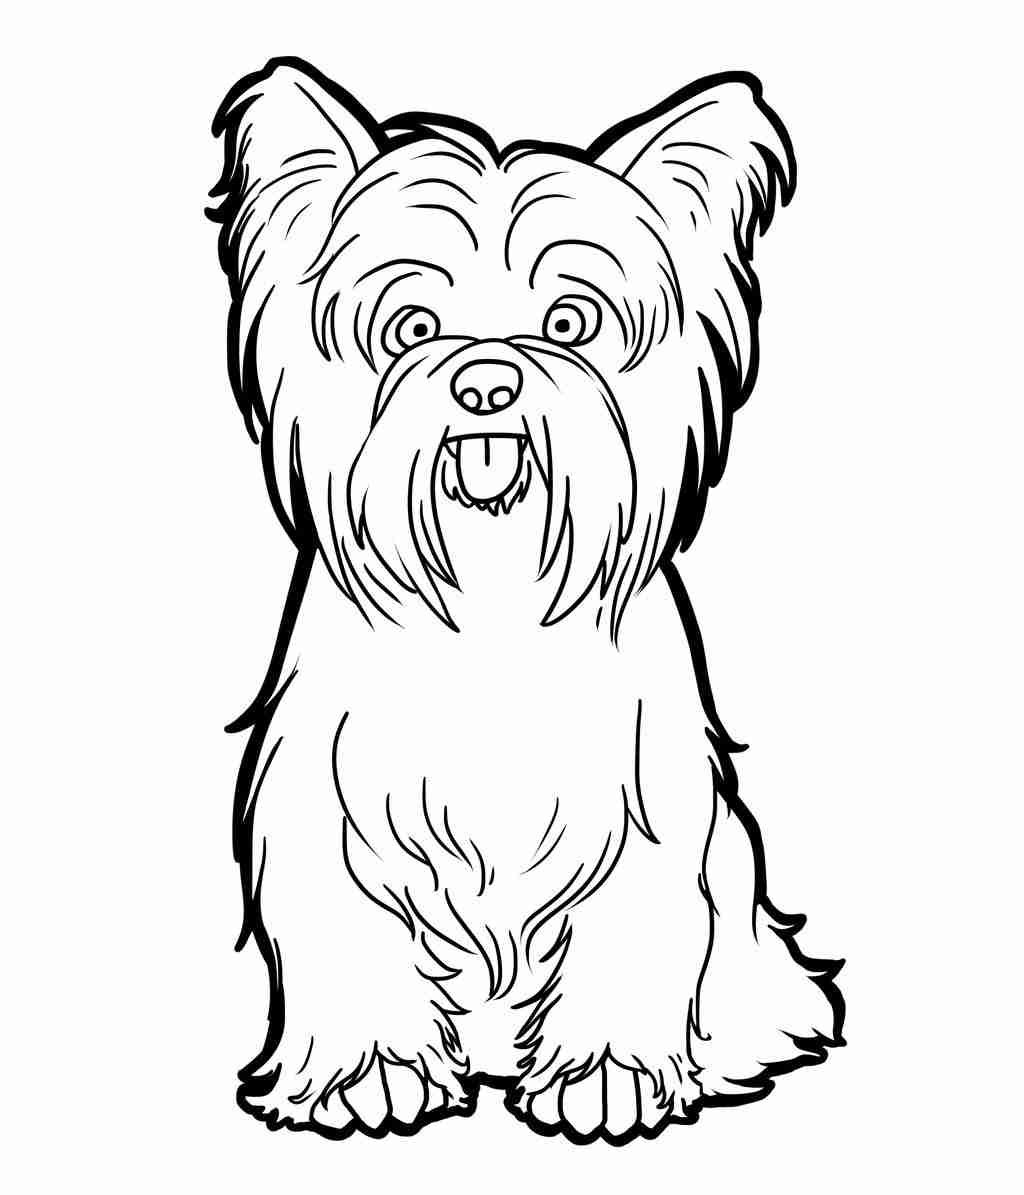 Yorkie Coloring Pages at GetColorings.com | Free printable colorings ...